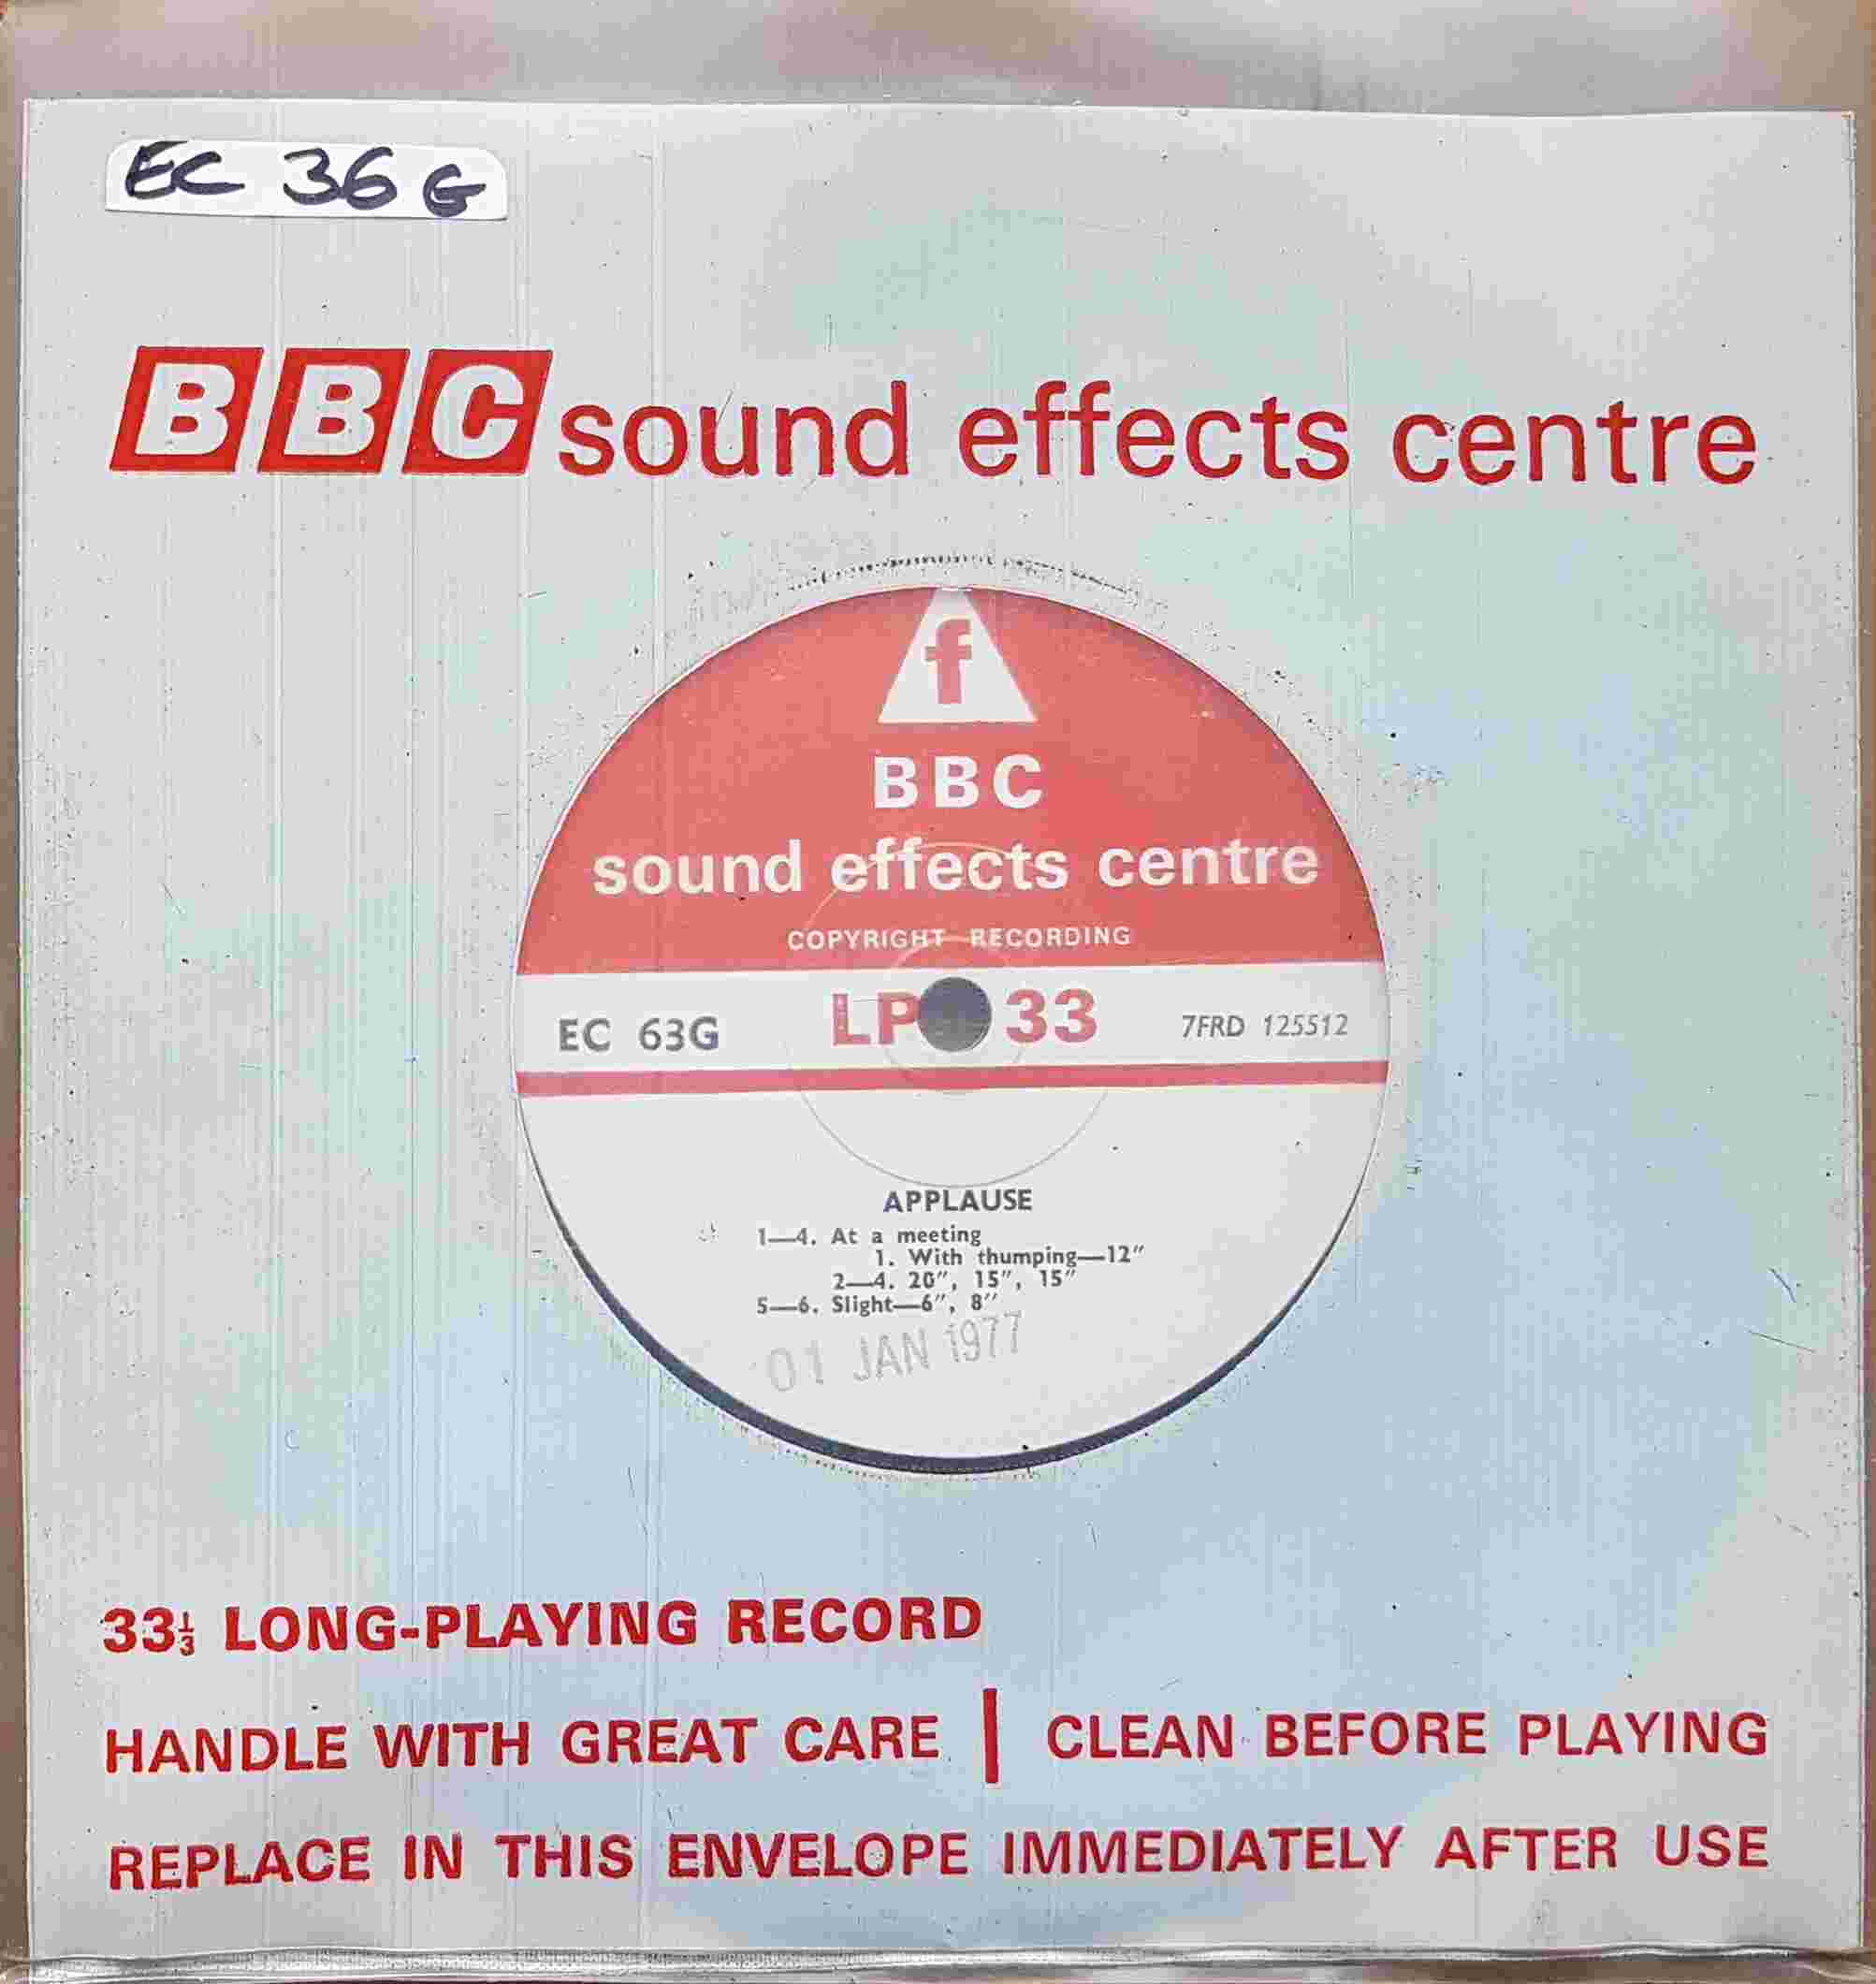 Picture of EC 63G Applause by artist Not registered from the BBC singles - Records and Tapes library